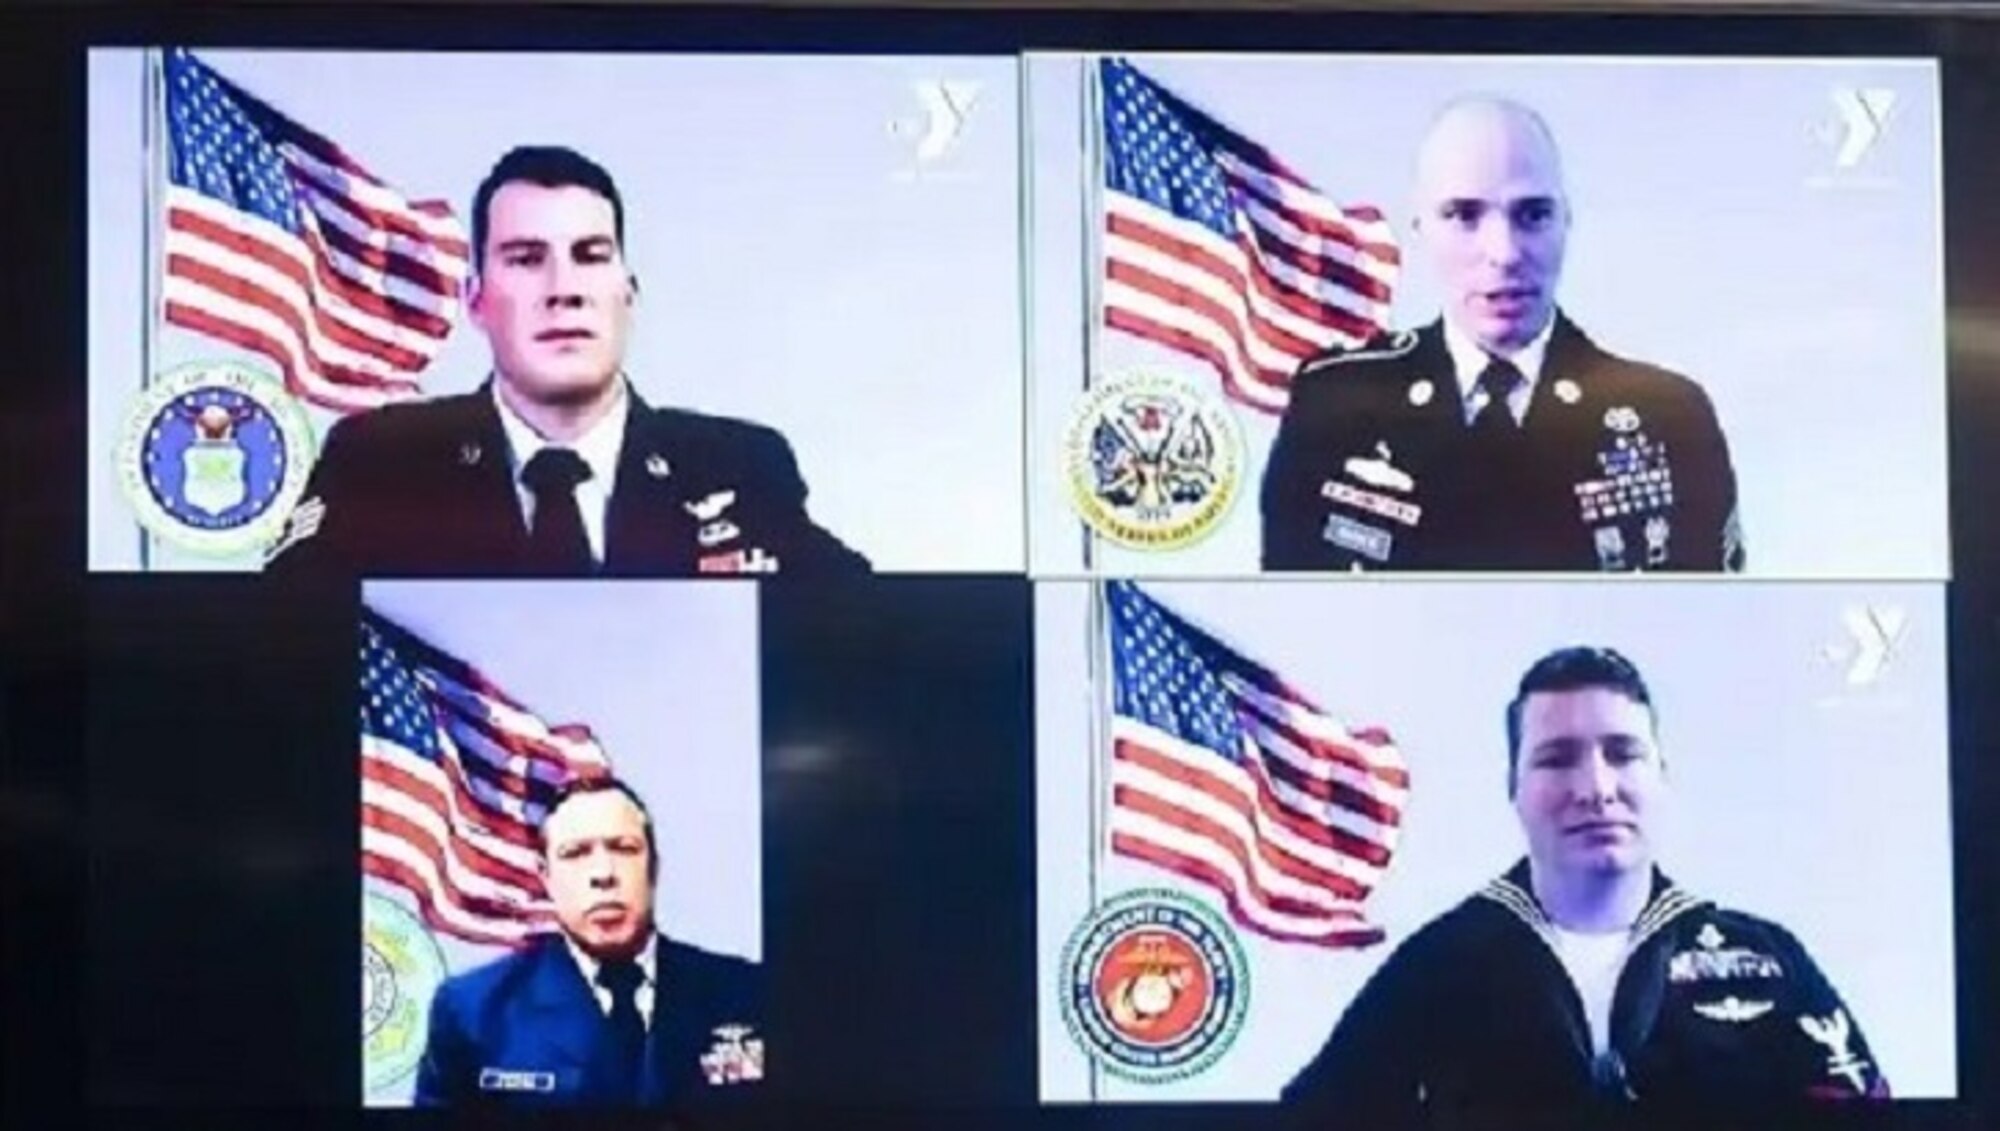 Image of four service members.